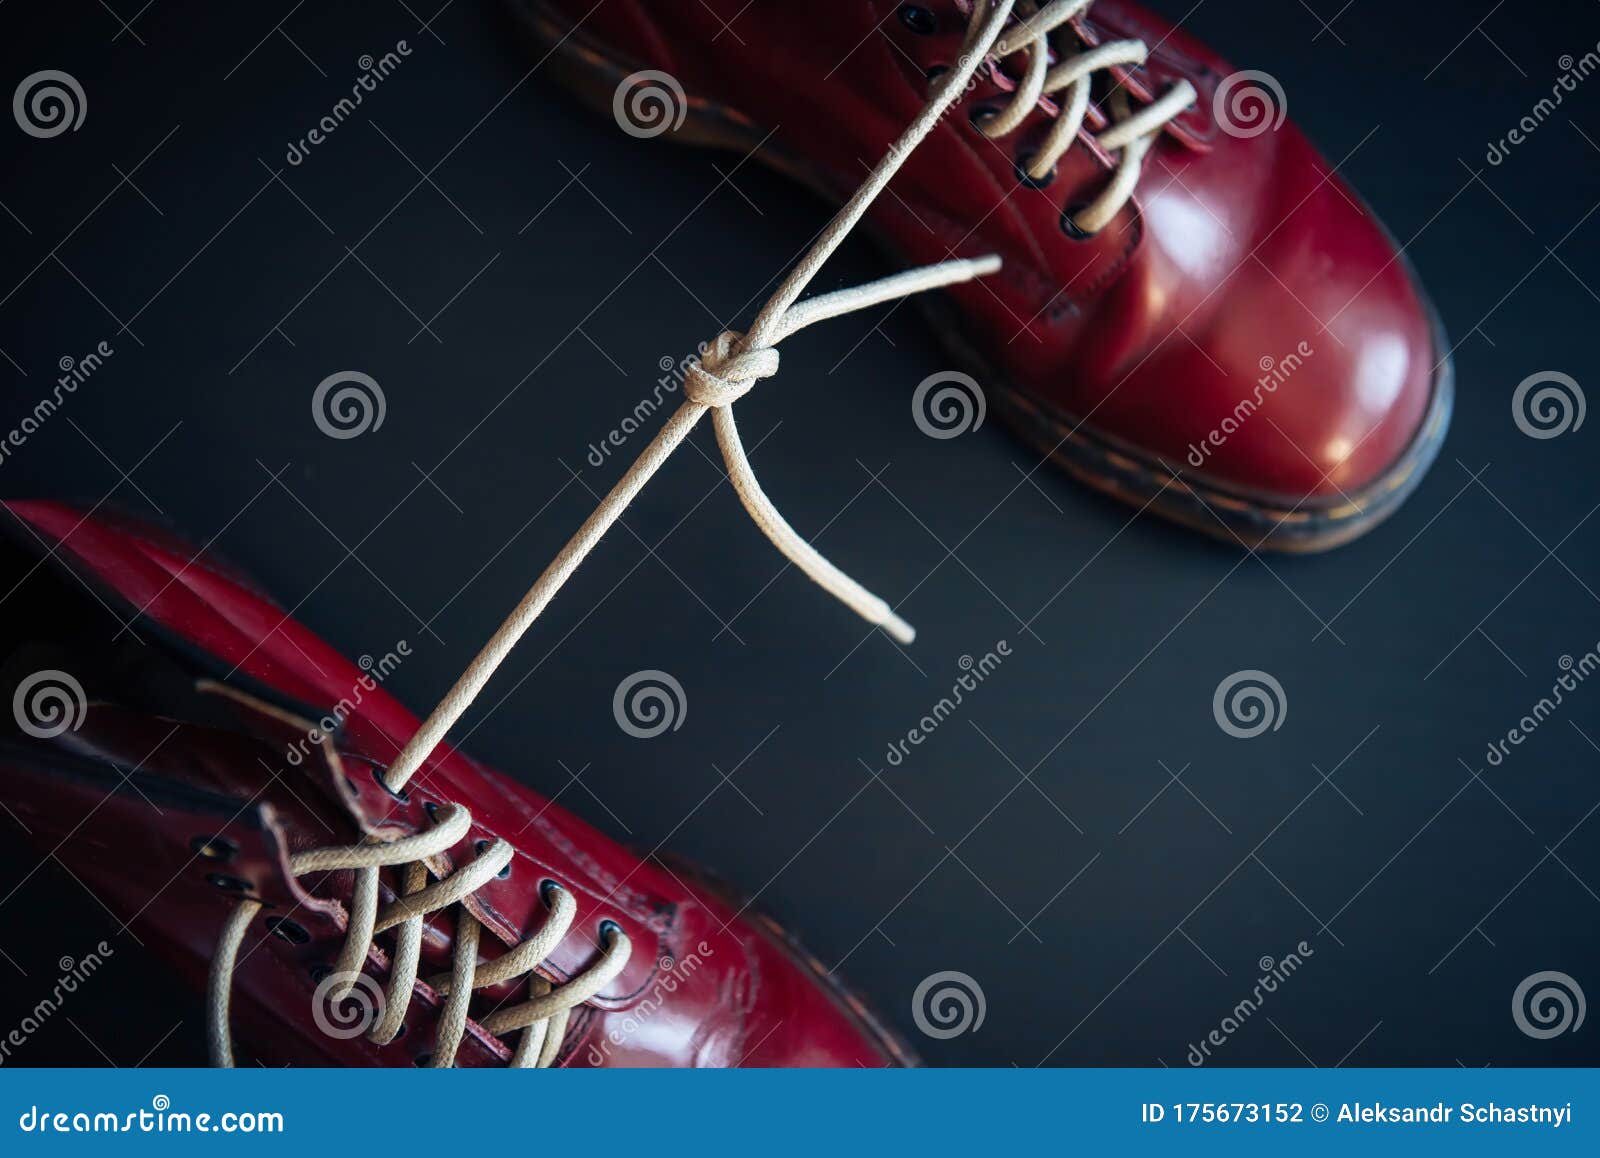 Stylish Red Shoes with Laces Linked Together on Black Background. High ...